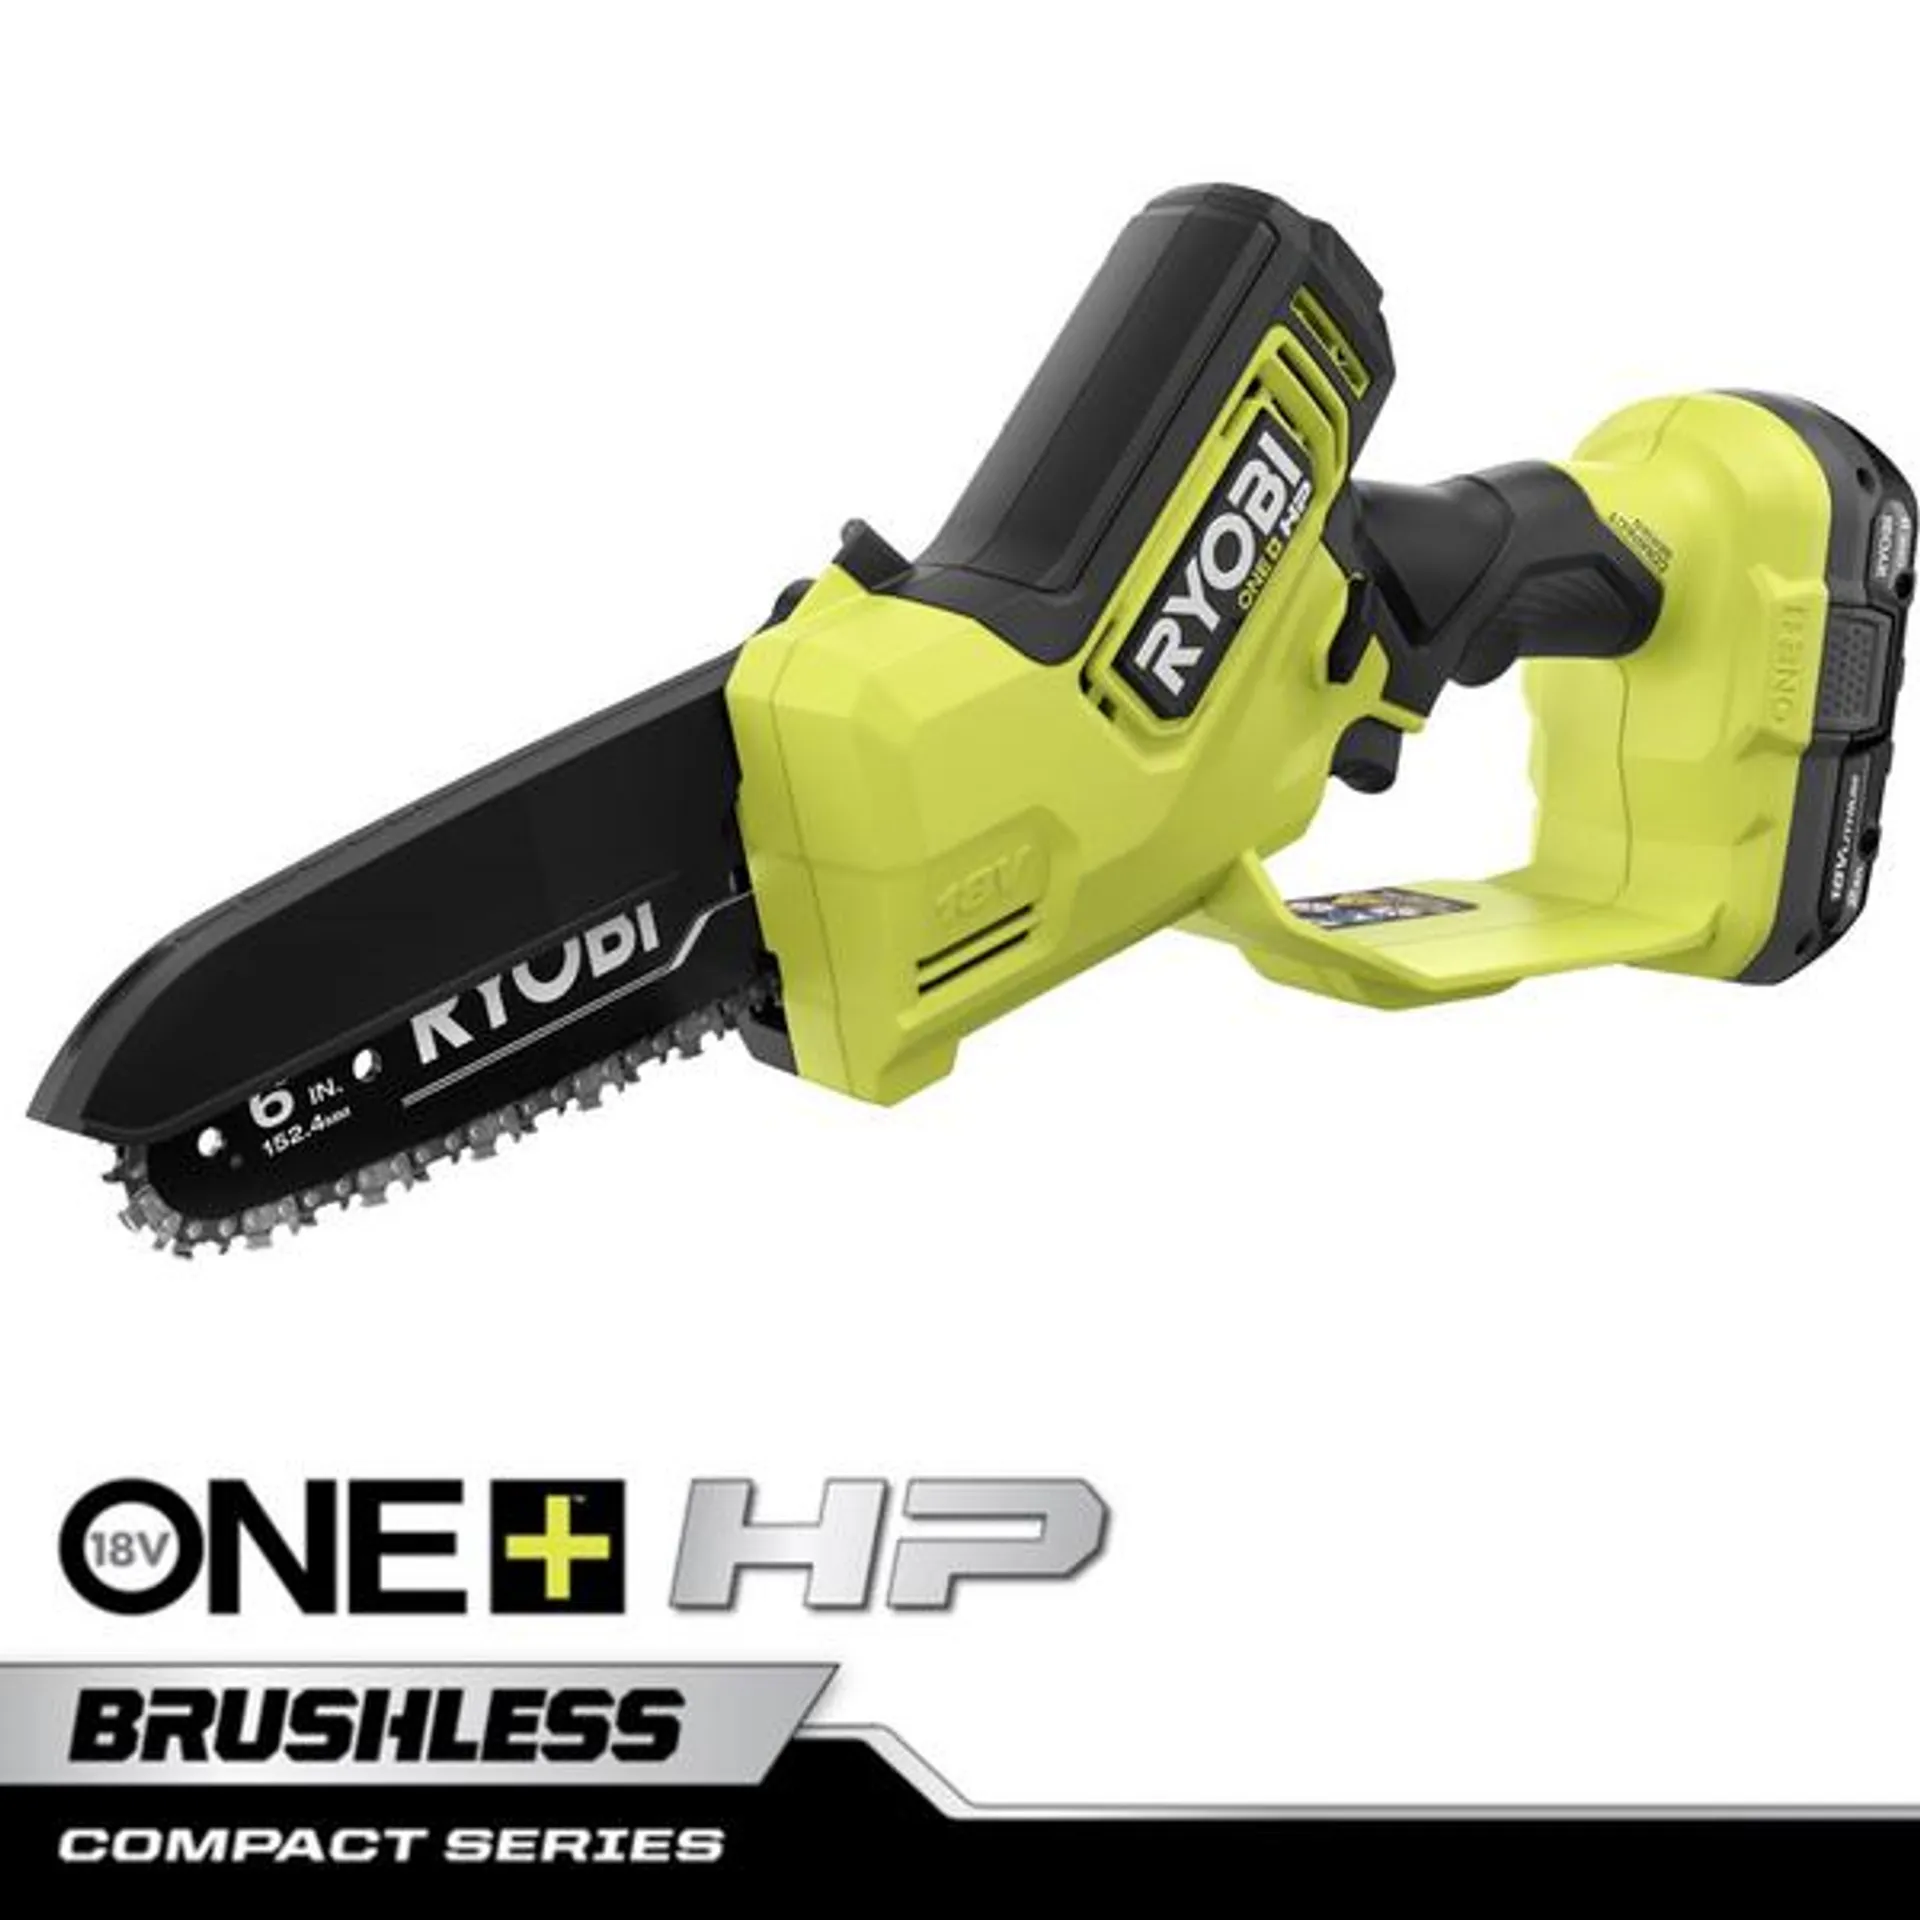 18V ONE+ HP 6" COMPACT BRUSHLESS PRUNING CHAINSAW KIT